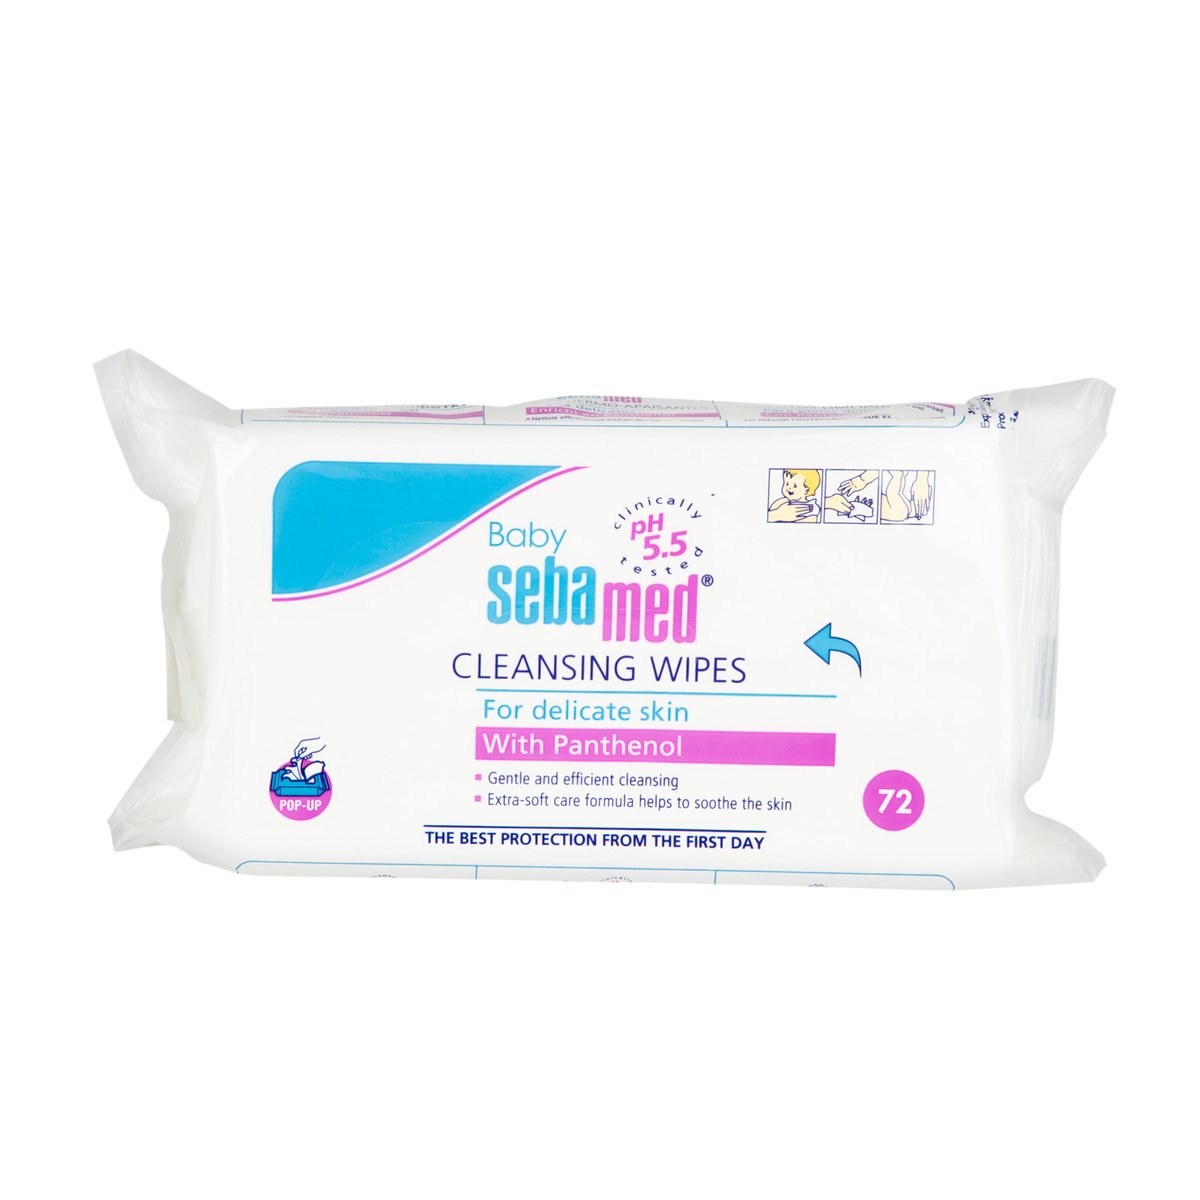 Sebamed Baby Cleansing Wipes 4 x 72pcs